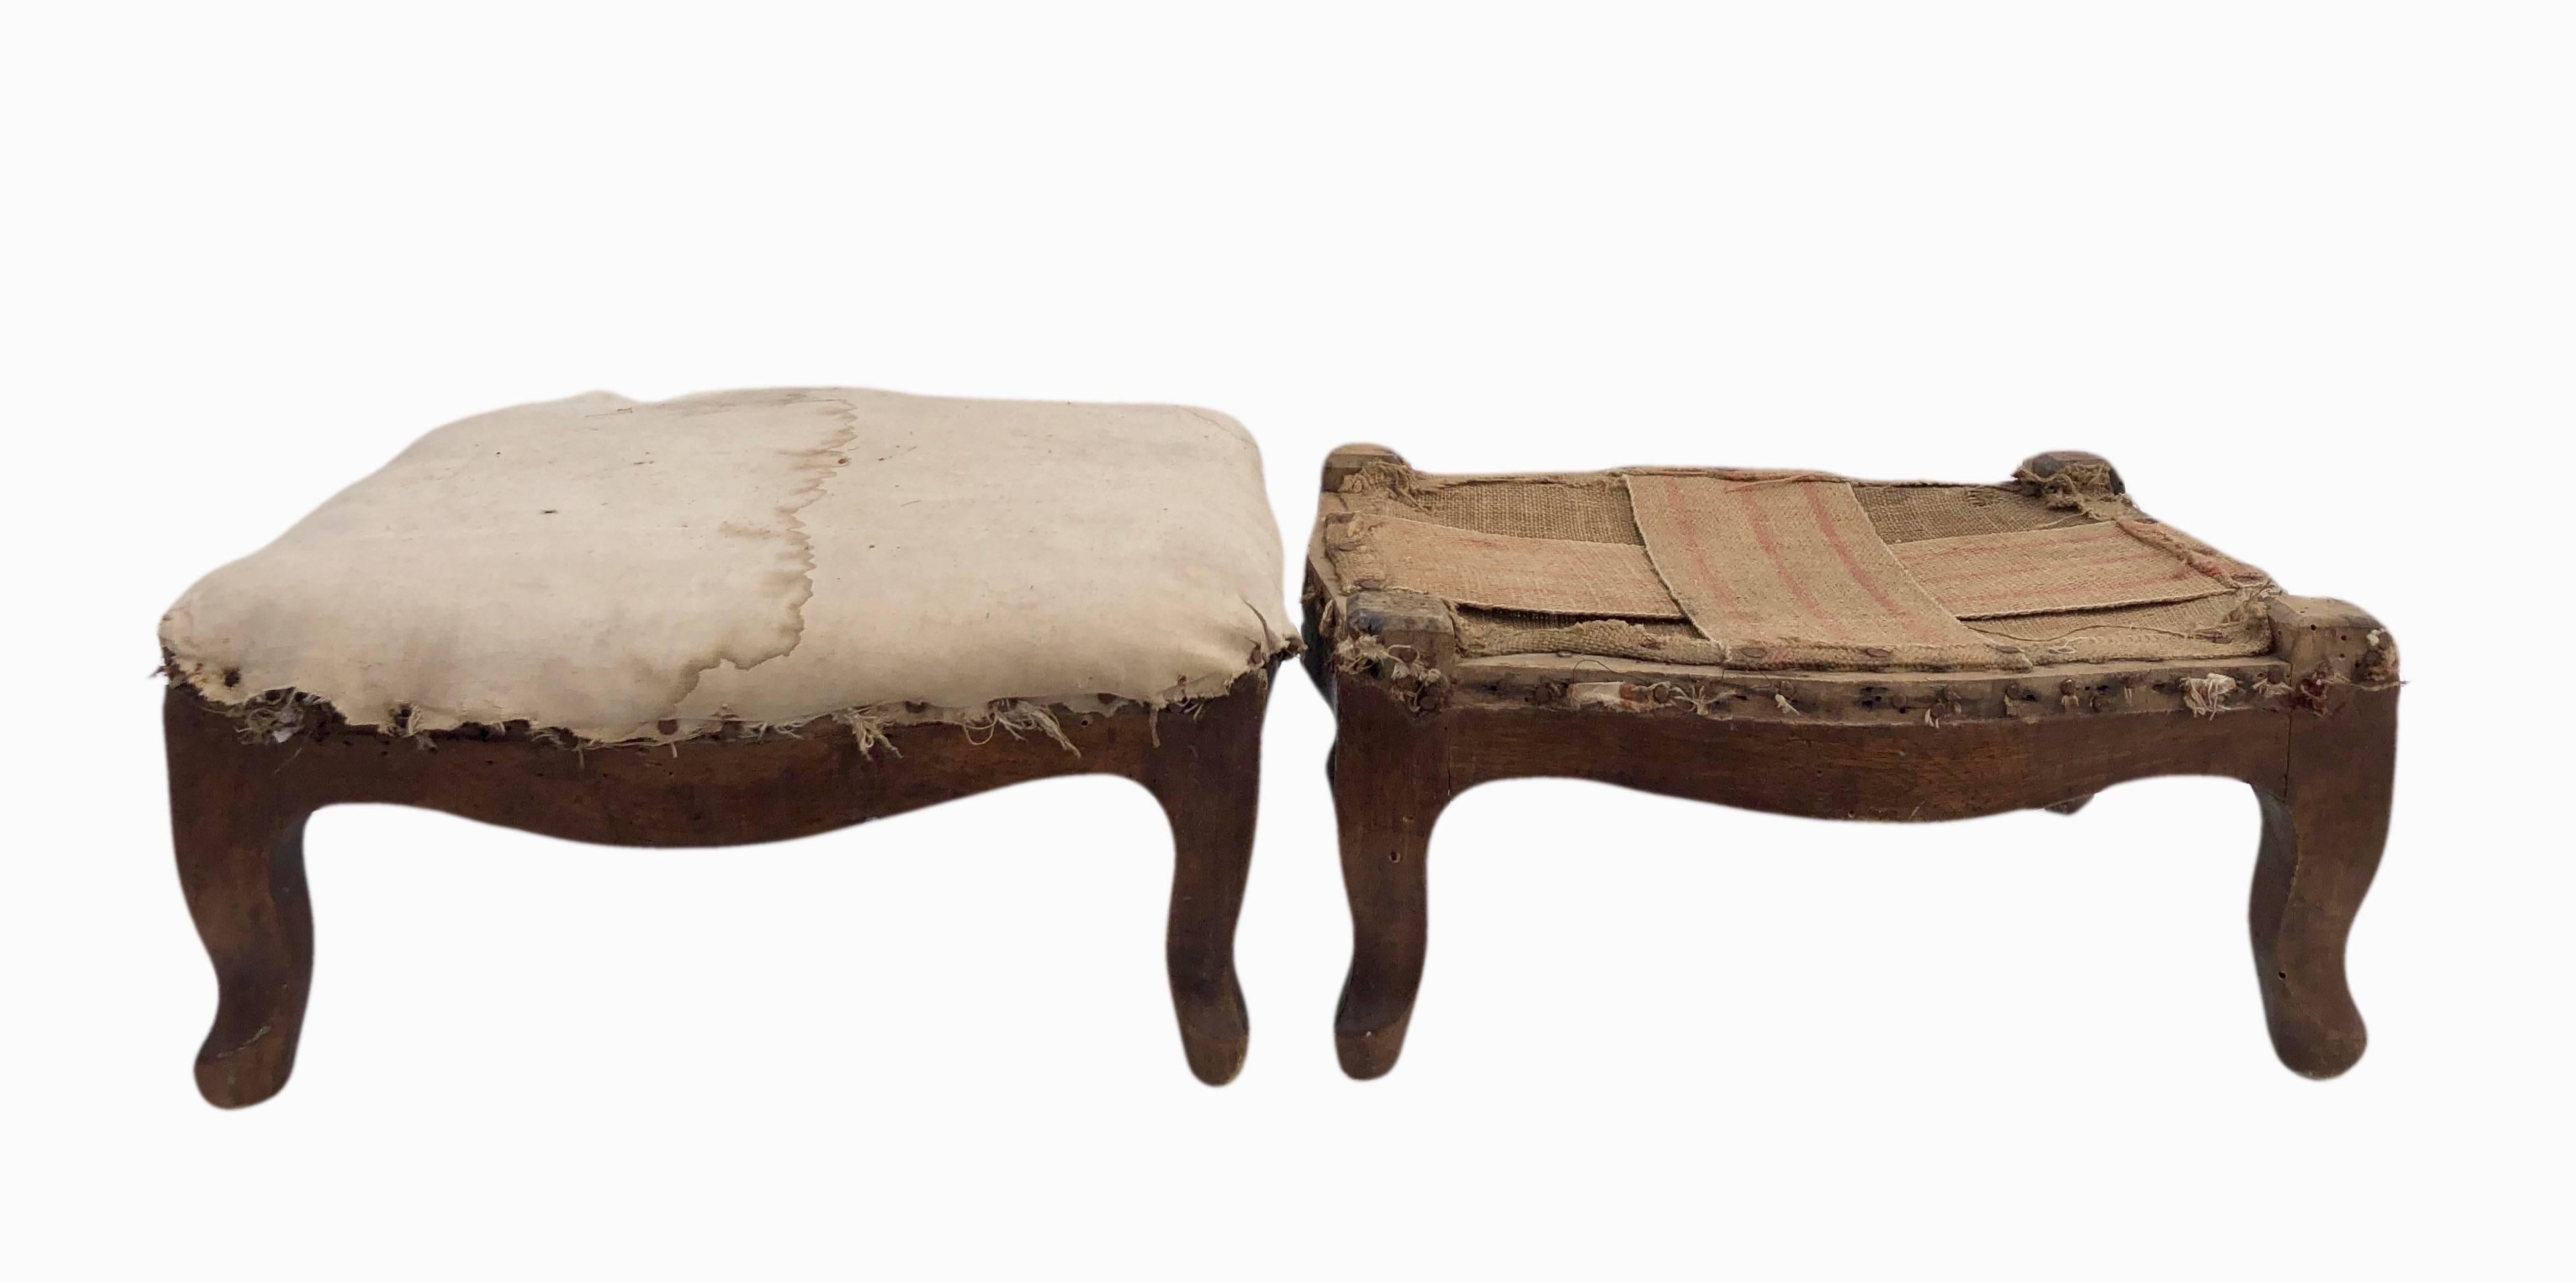 These are a beautiful pair of wooden French early 1800s footstools. One is straw filled with a white cotton cover while the other has its original banding. They are Regency footstools untouched in their original state with burlap covered bottoms.